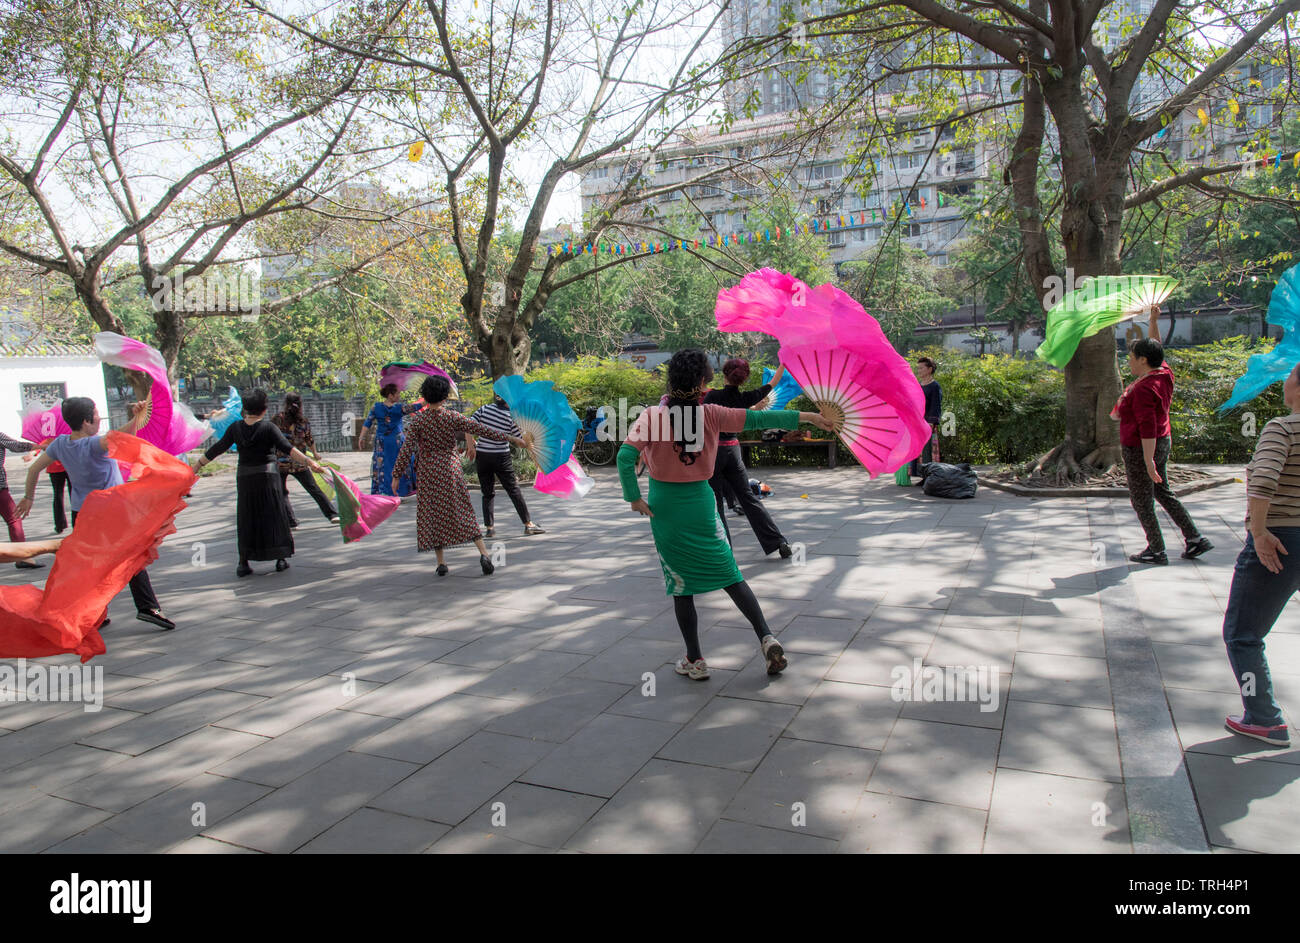 People dancing in Huanhua park for exercise and leisure in Chengdu, Sichuan, China Stock Photo